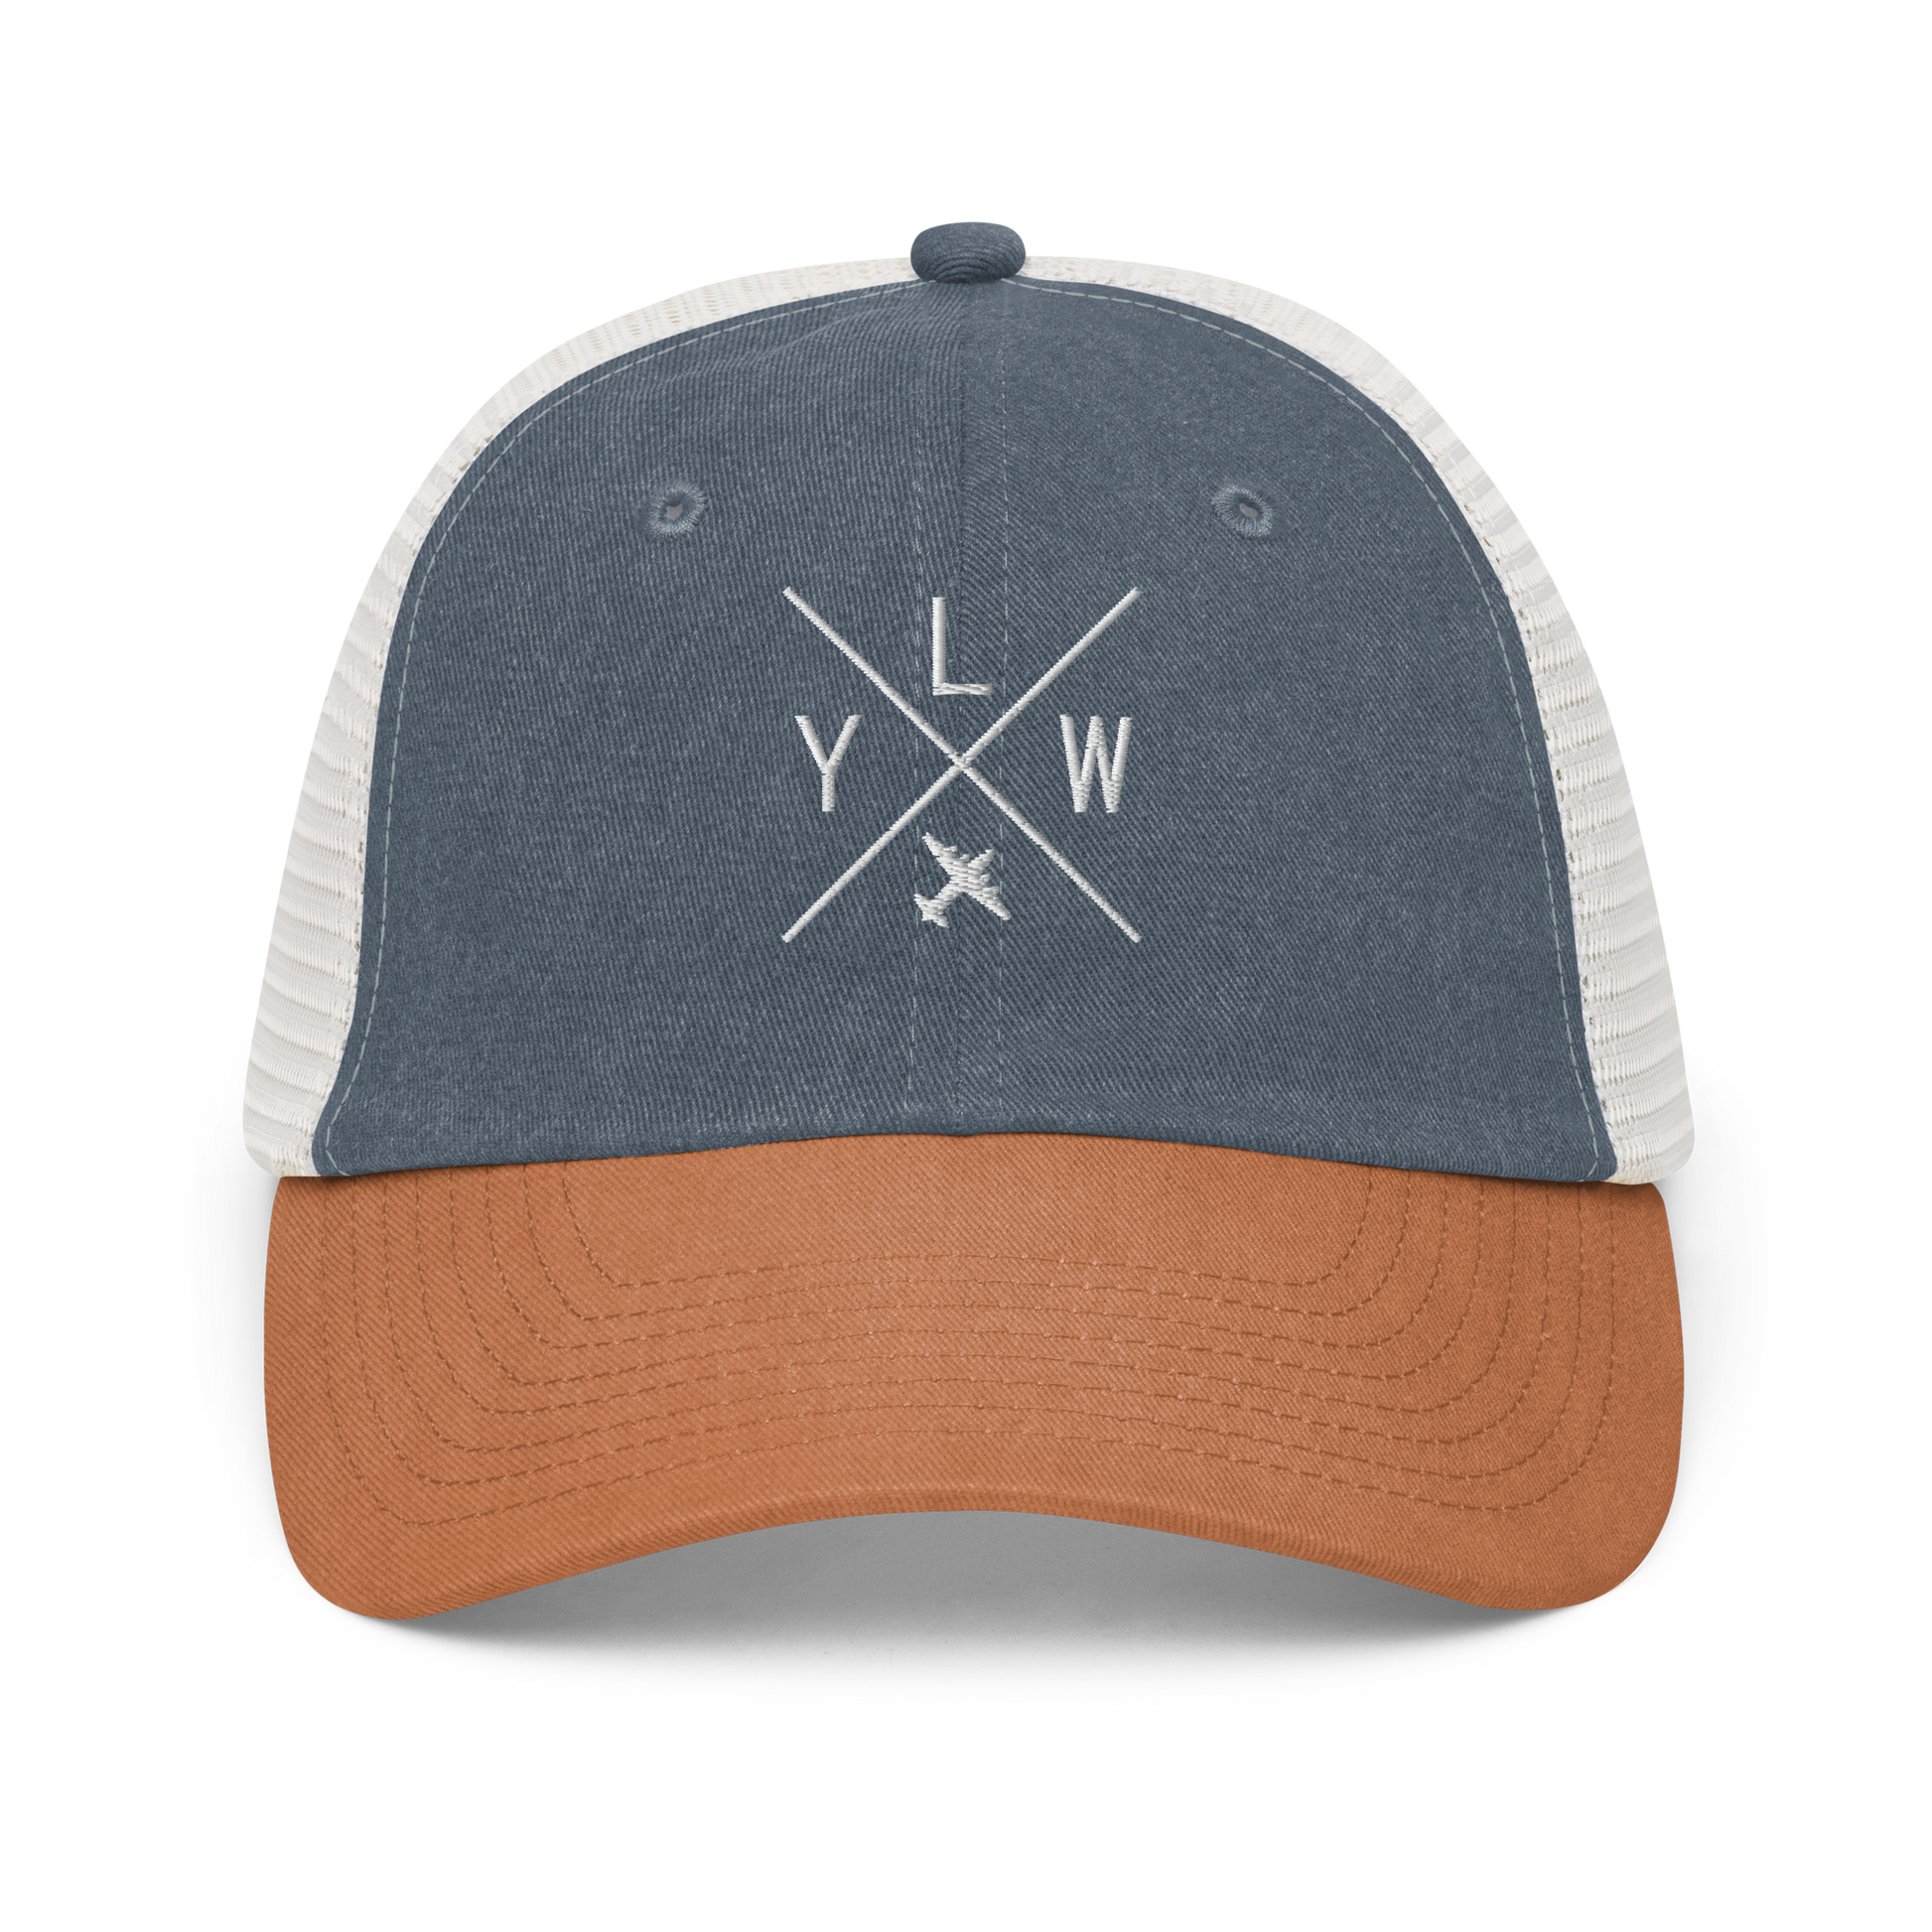 YHM Designs - YLW Kelowna Pigment-Dyed Trucker Cap - Crossed-X Design with Airport Code and Vintage Propliner - White Embroidery - Image 15